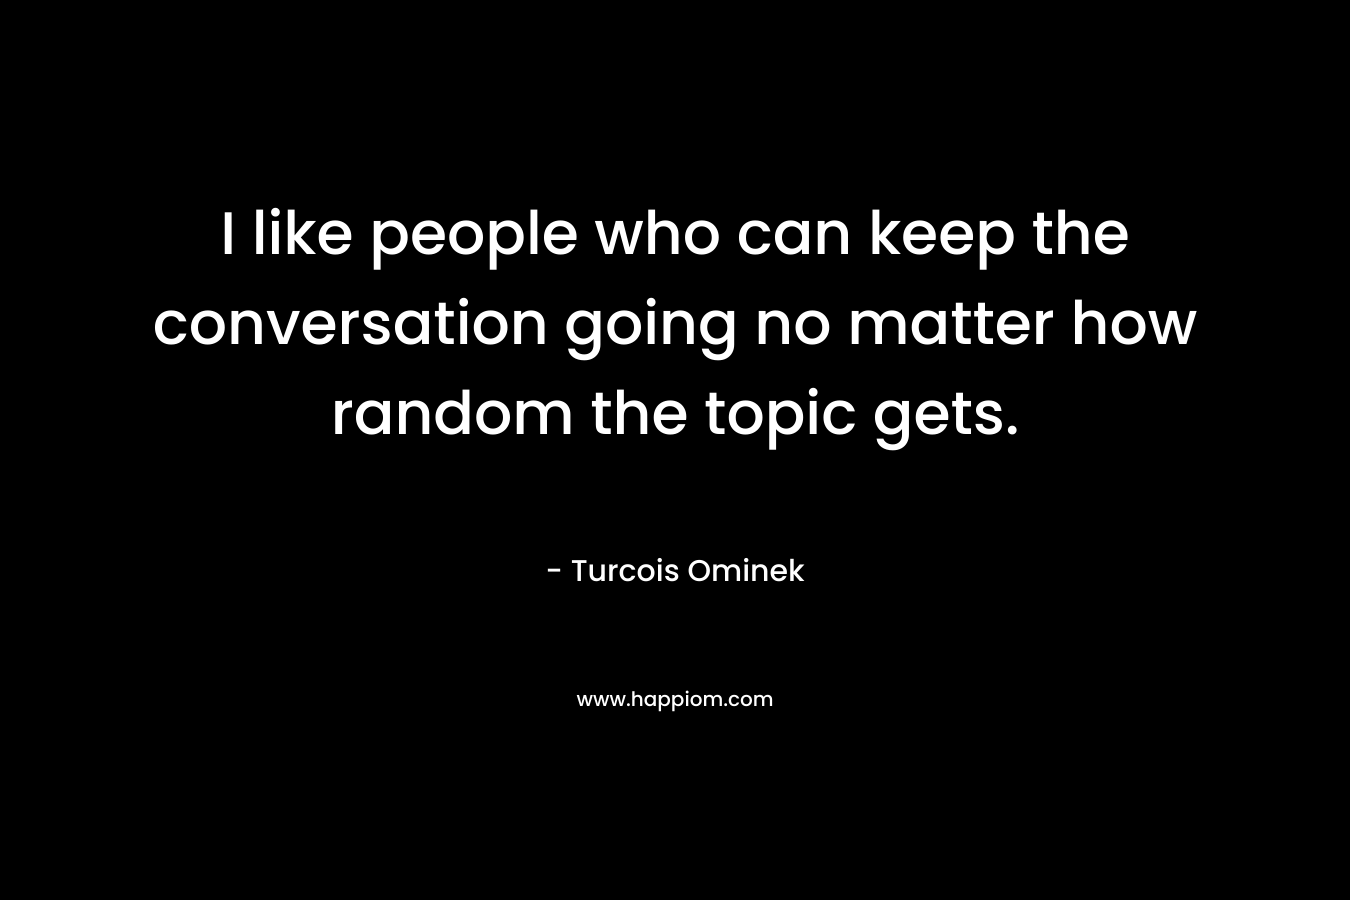 I like people who can keep the conversation going no matter how random the topic gets.